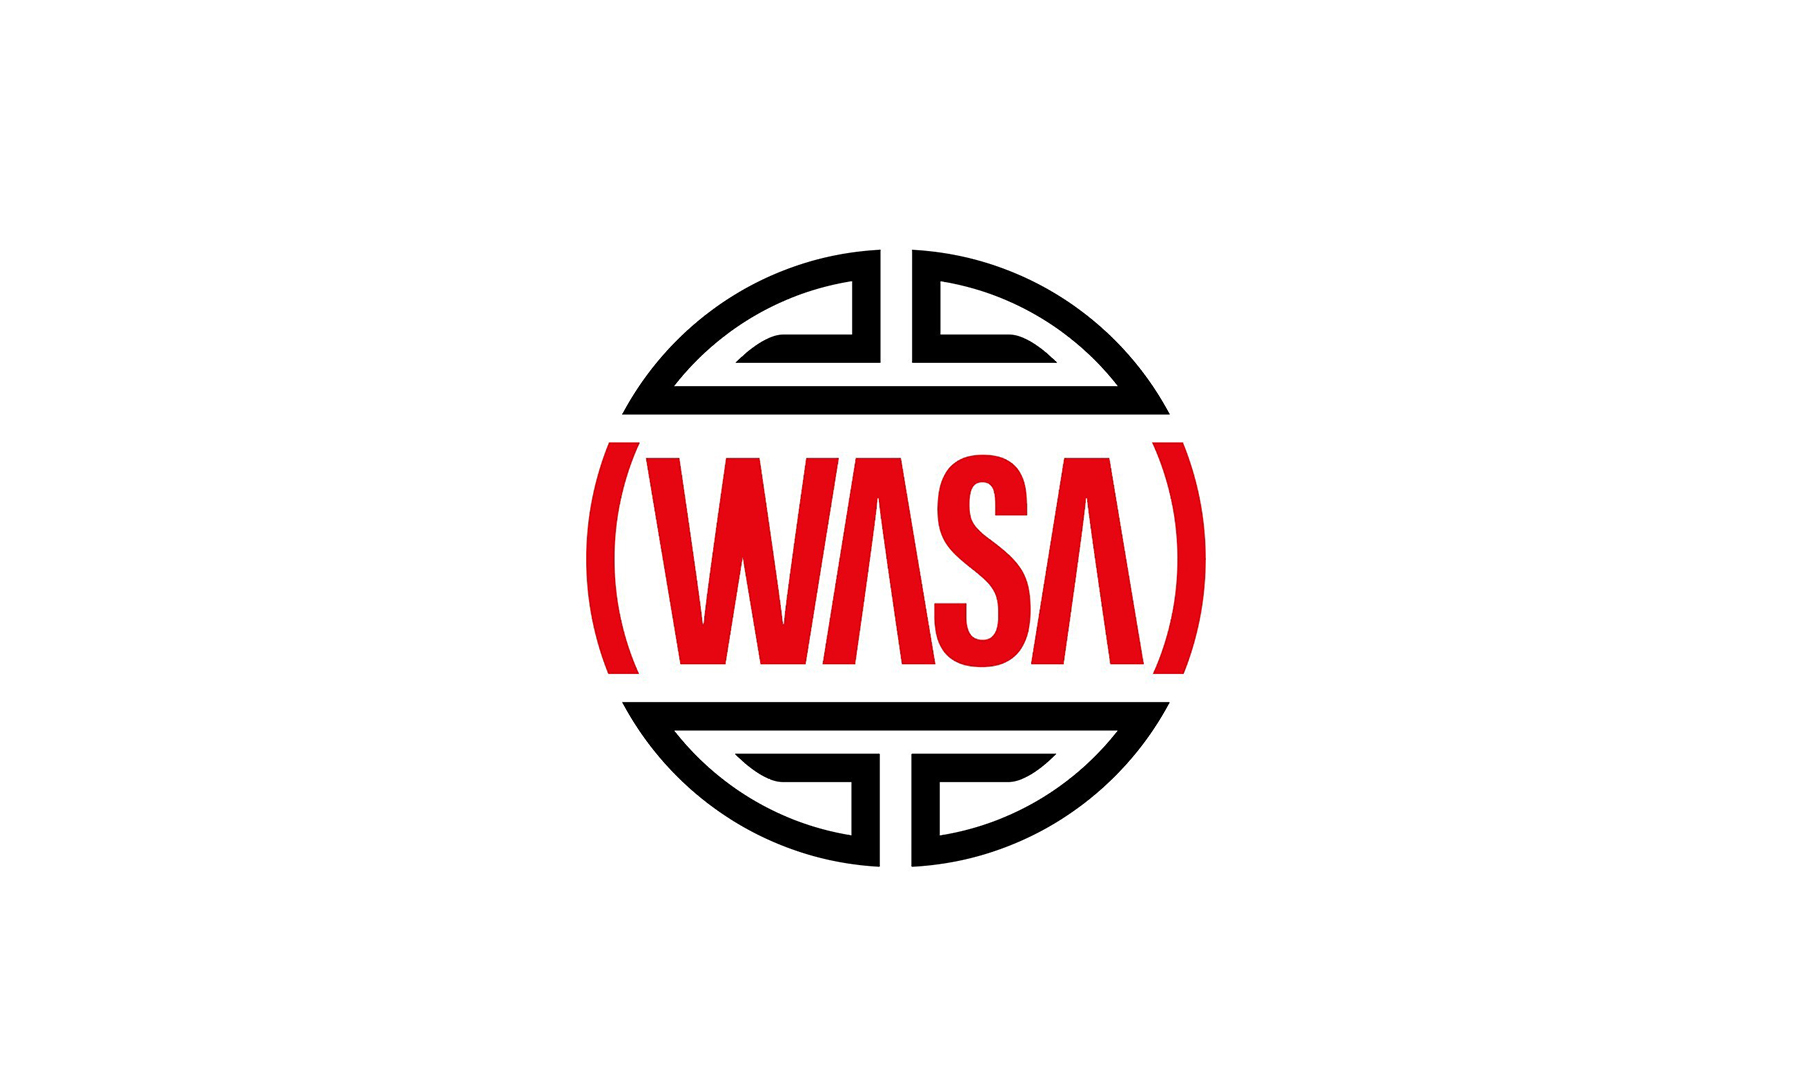 Wasa's images1